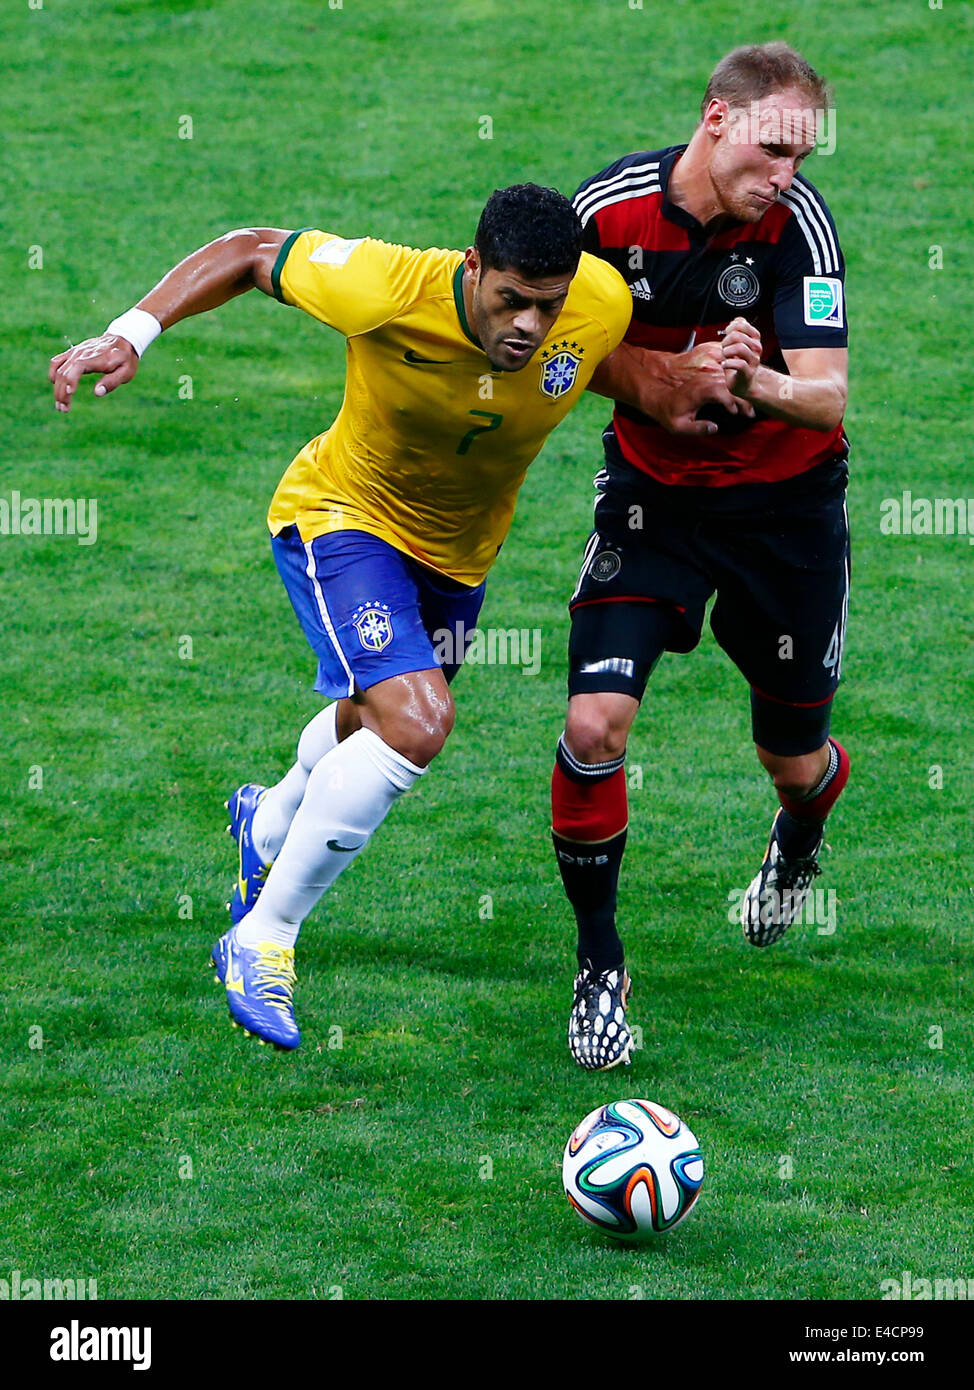 Belo Horizonte, Brazil. 8th July, 2014. Brazil's Hulk (L) vies with Germany's Benedikt Howedes during a semifinal match between Brazil and Germany of 2014 FIFA World Cup at the Estadio Mineirao Stadium in Belo Horizonte, Brazil, on July 8, 2014. Credit:  Liu Bin/Xinhua/Alamy Live News Stock Photo